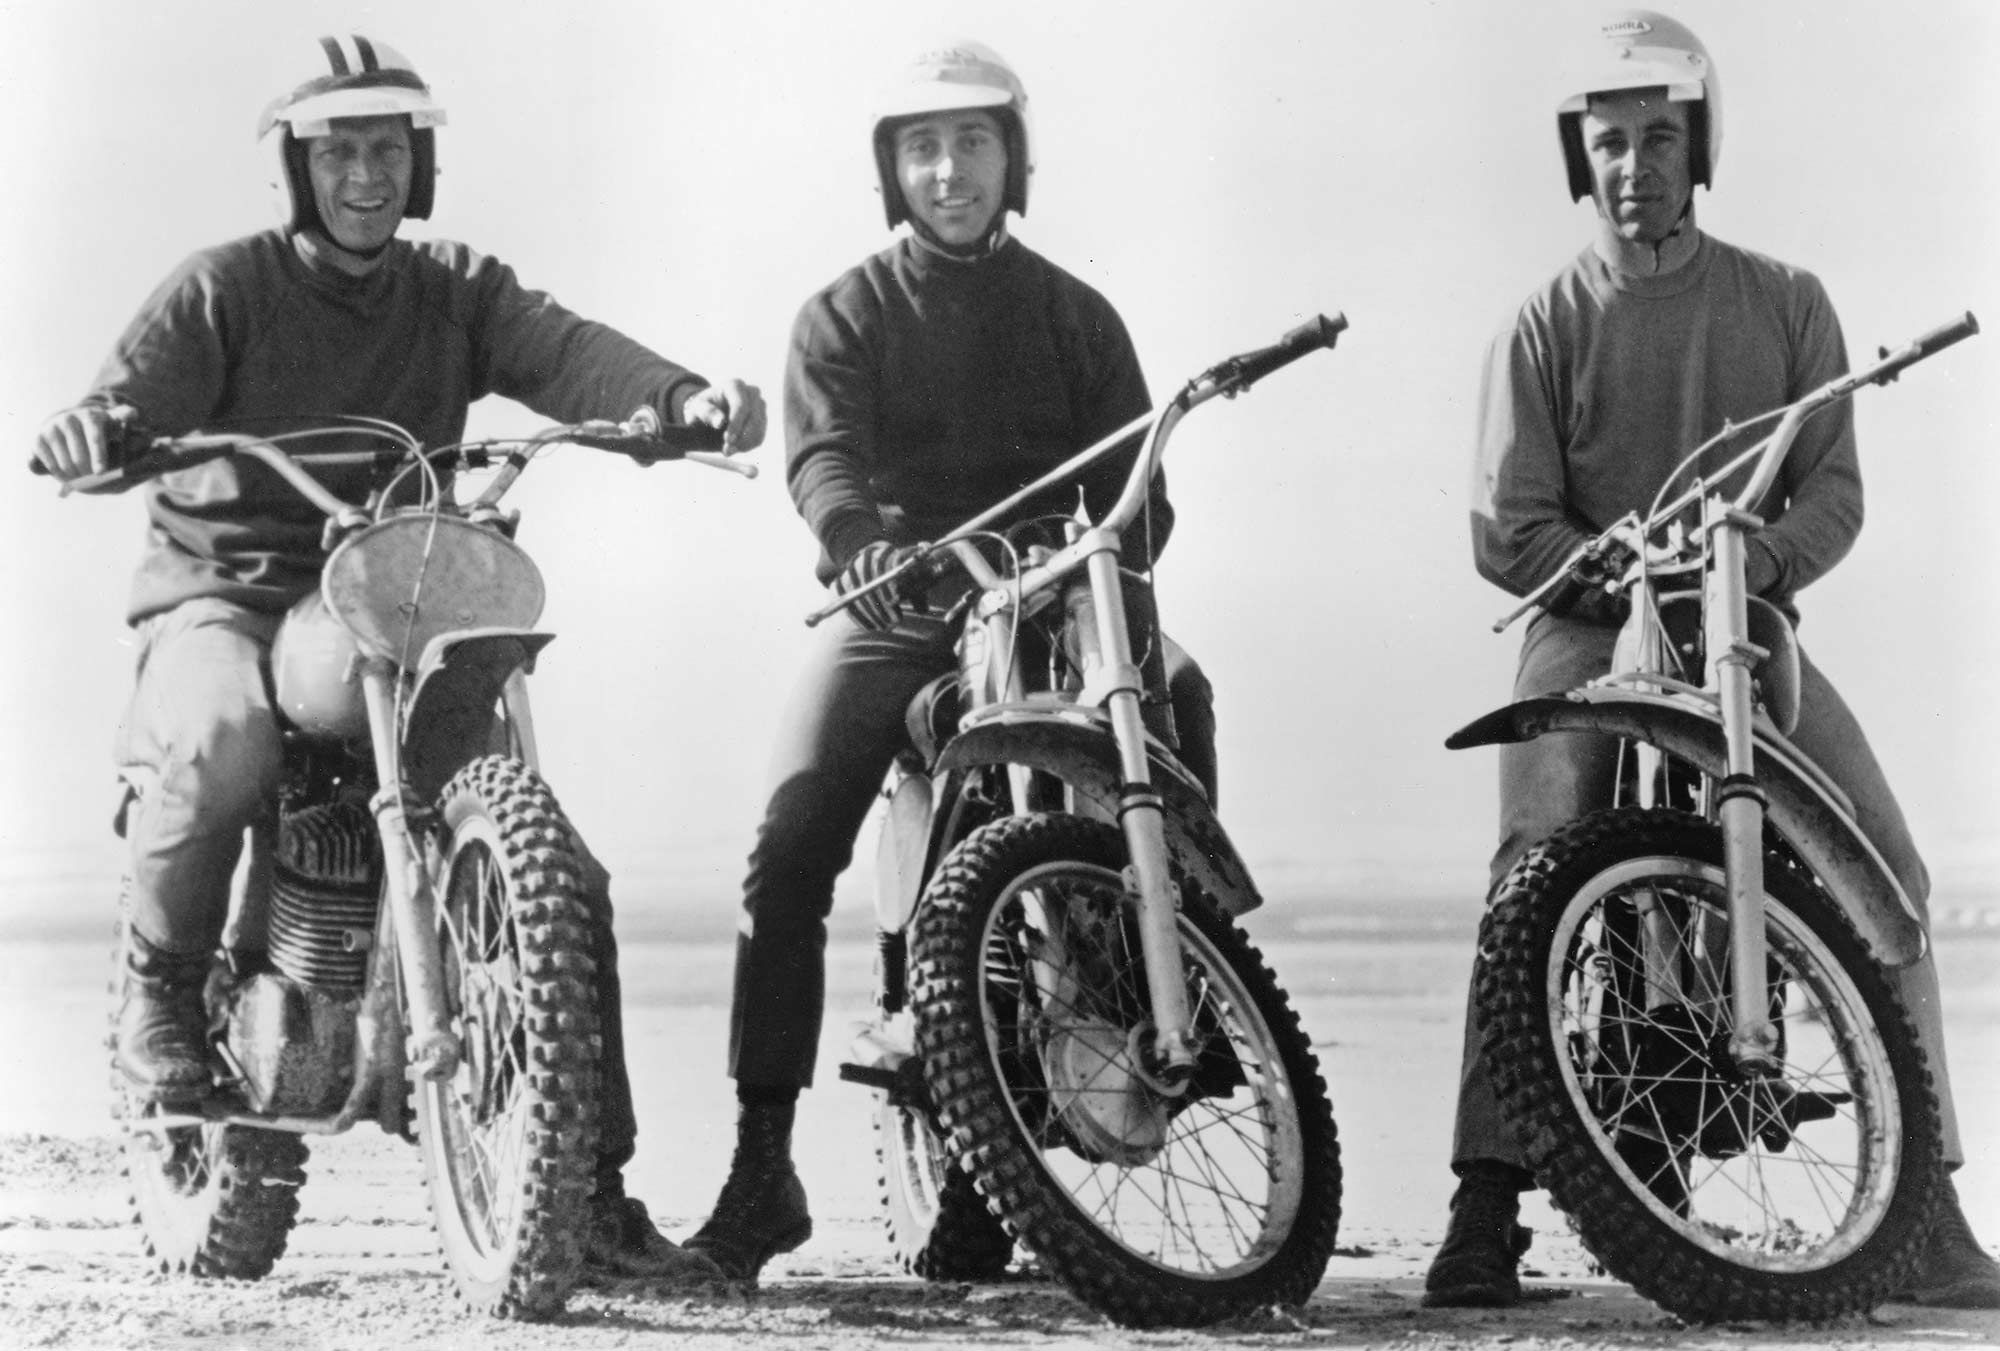 Steve McQueen, Mert Lawill, and Malcolm Smith are aspirational motorcycle racers from Hollywood history.